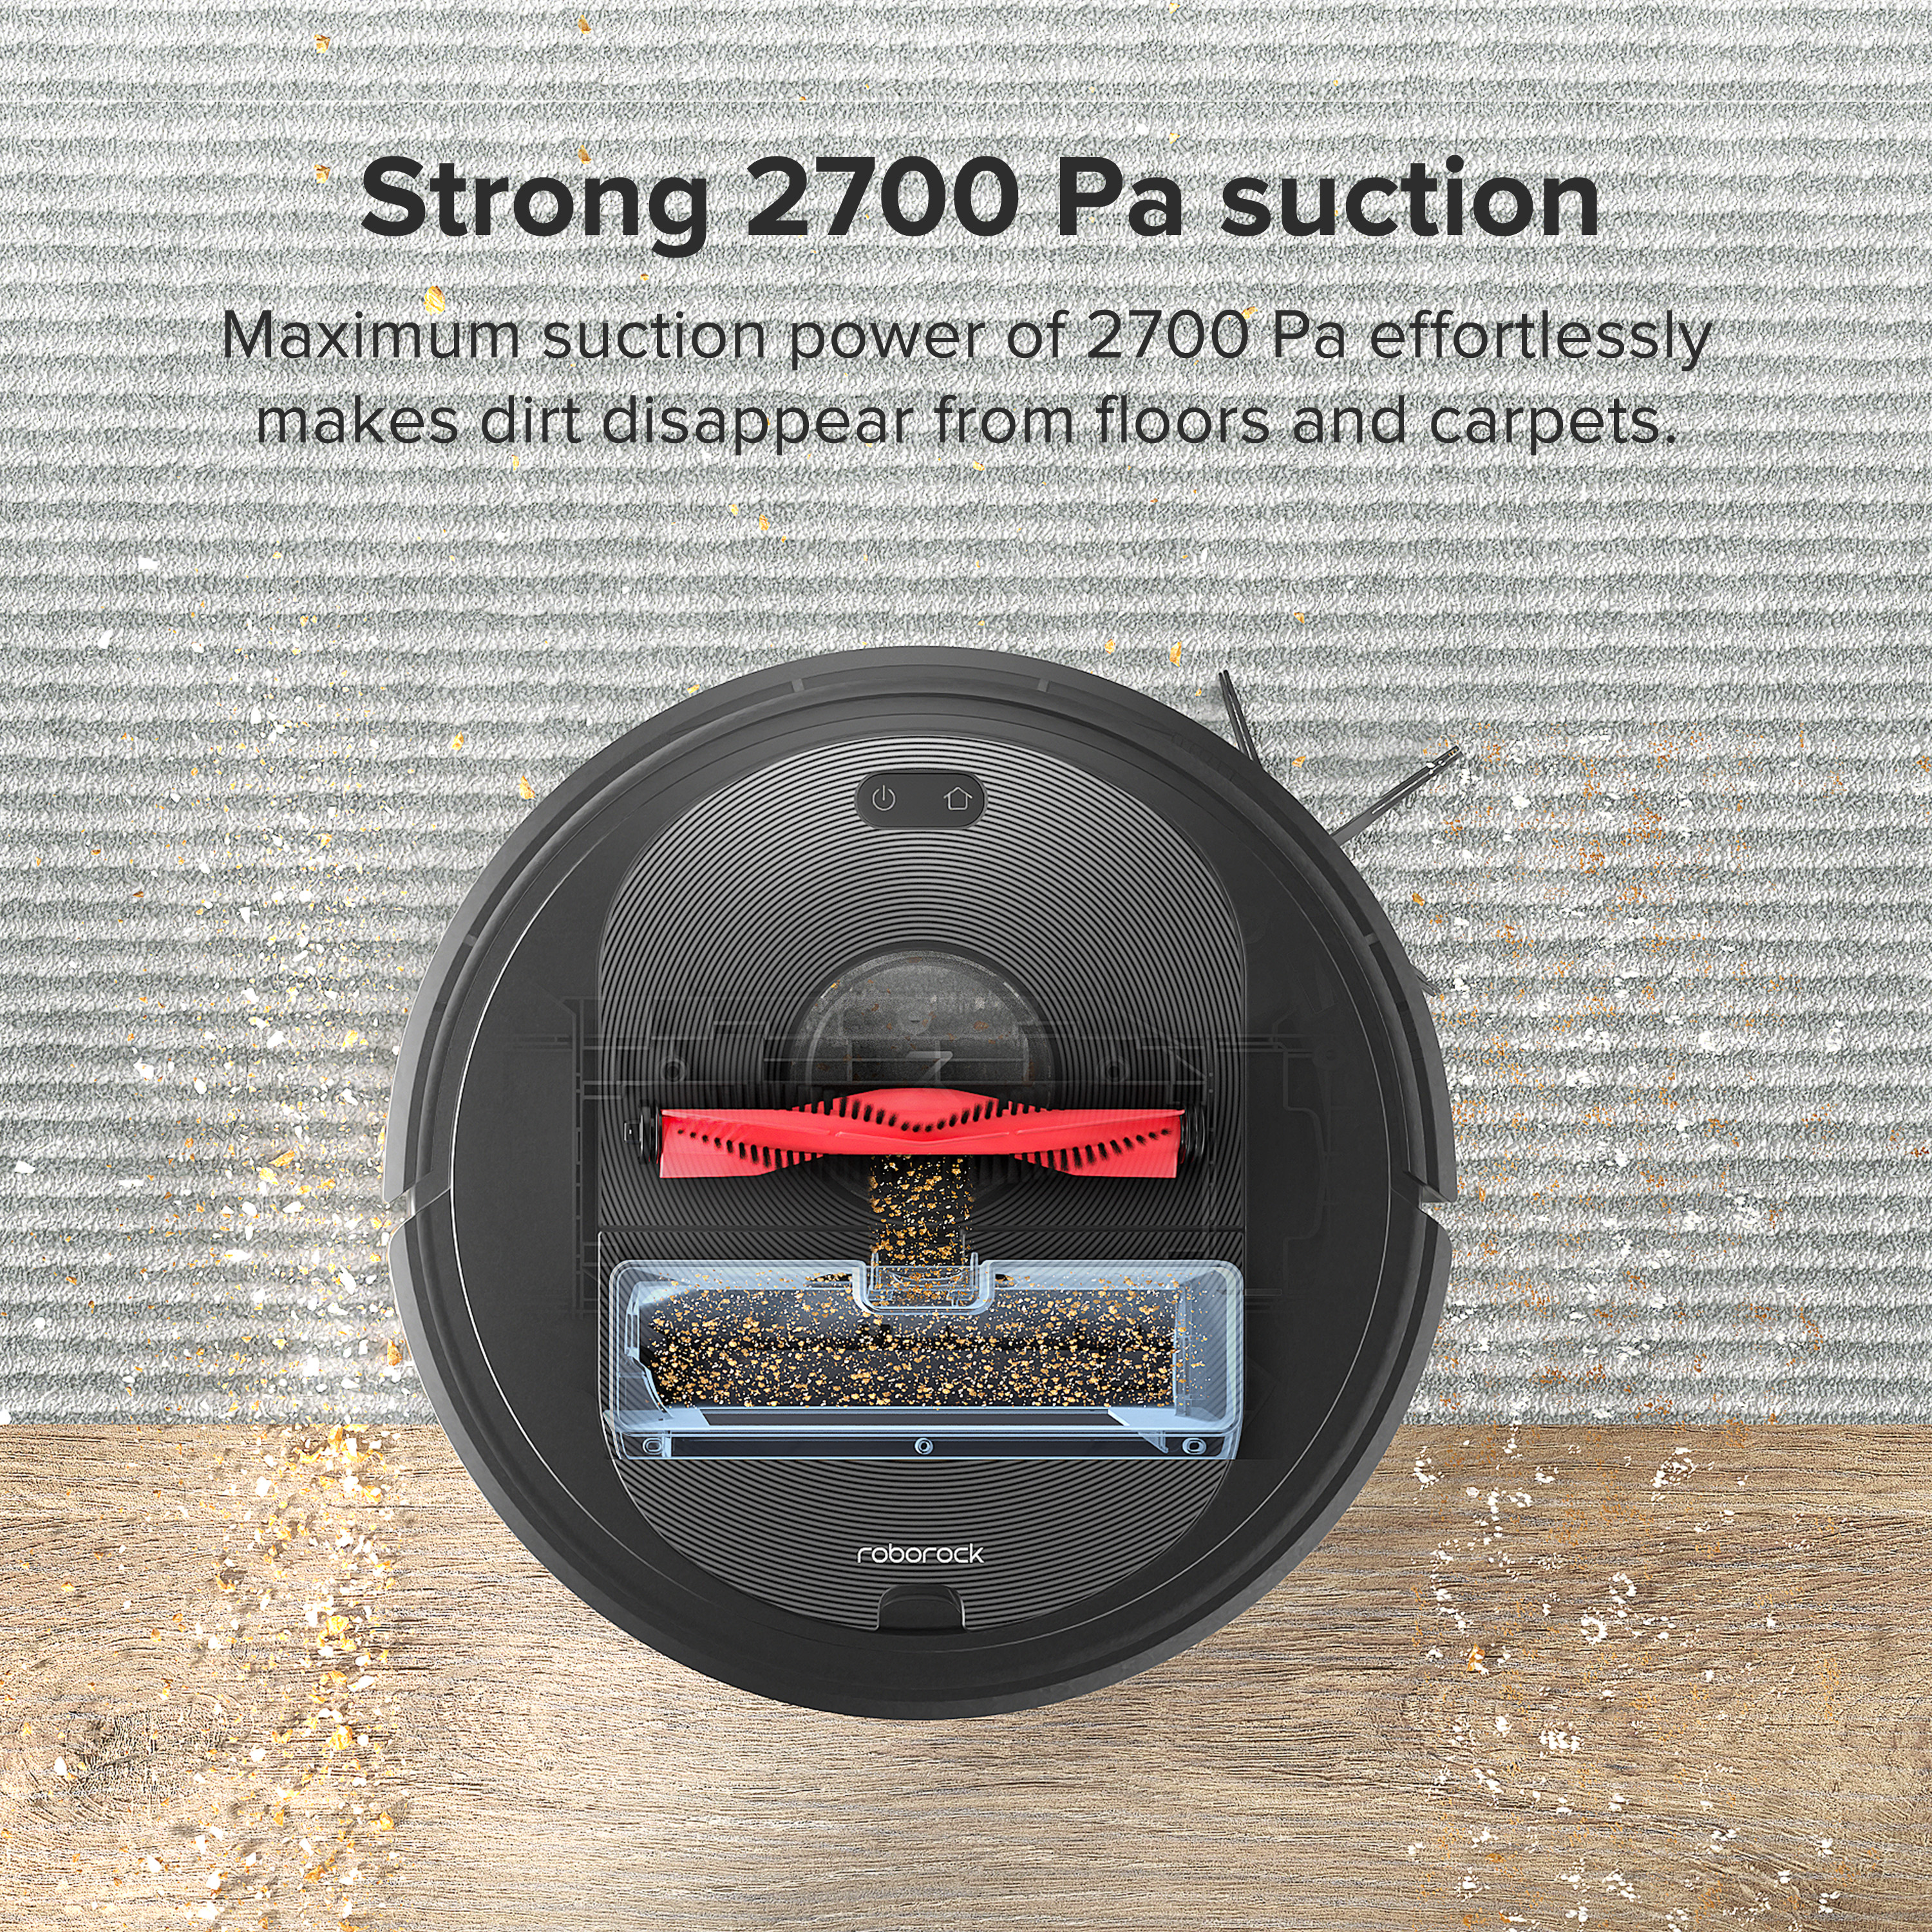 Roborock® Q5+ Auto Emptying Robot Vacuum Cleaner, 2700 Pa Suction Power, with App Control - image 5 of 15